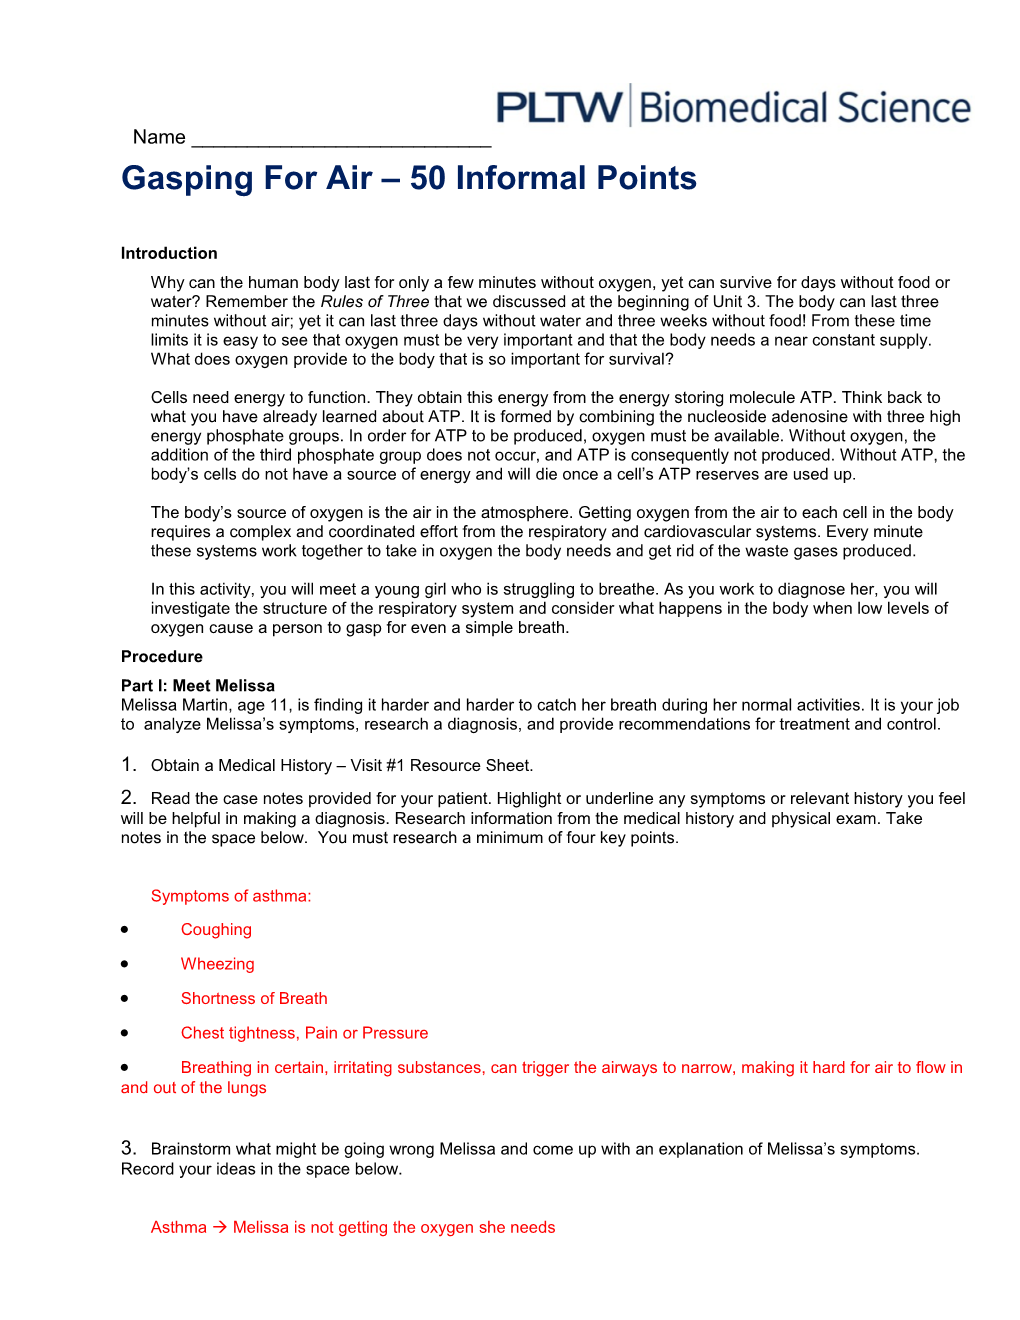 Gasping for Air 50 Informal Points